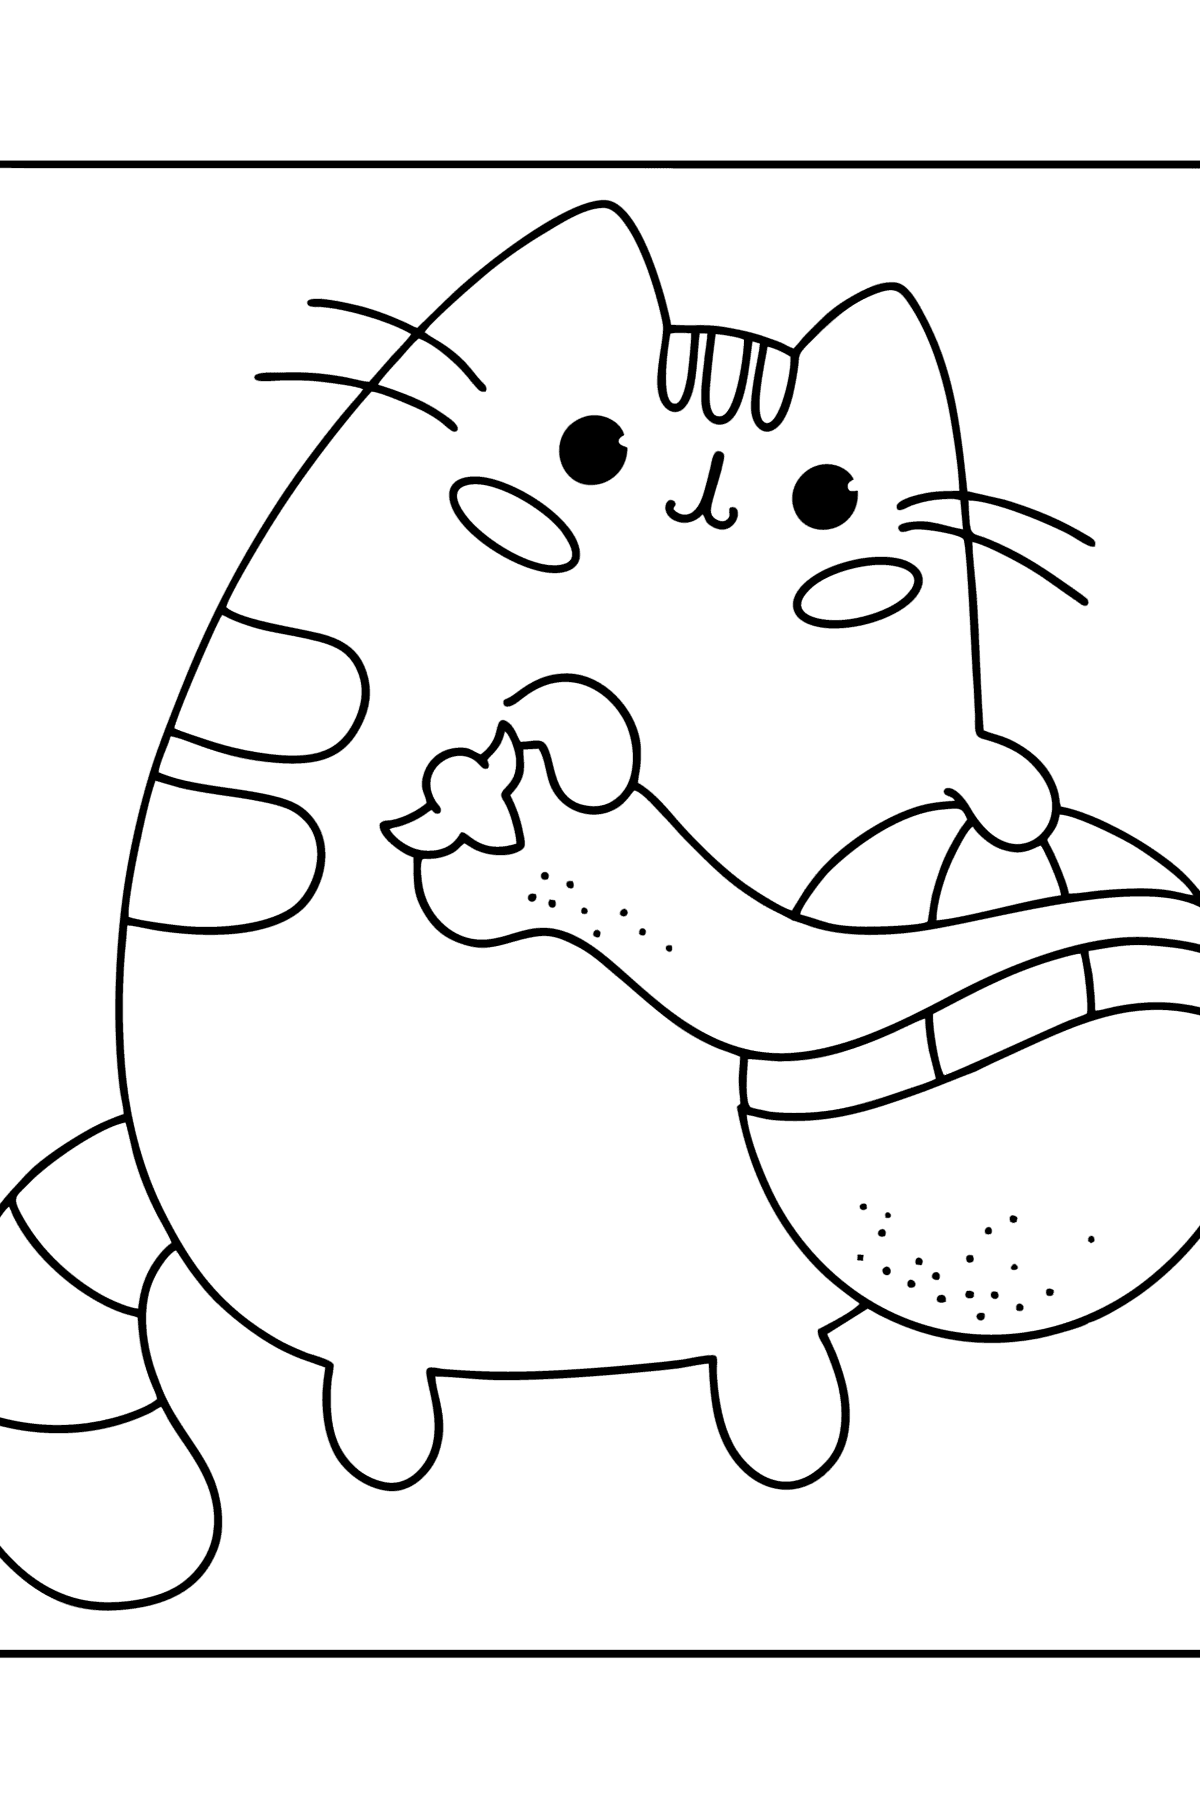 Cute Pusheen сoloring page - Coloring Pages for Kids